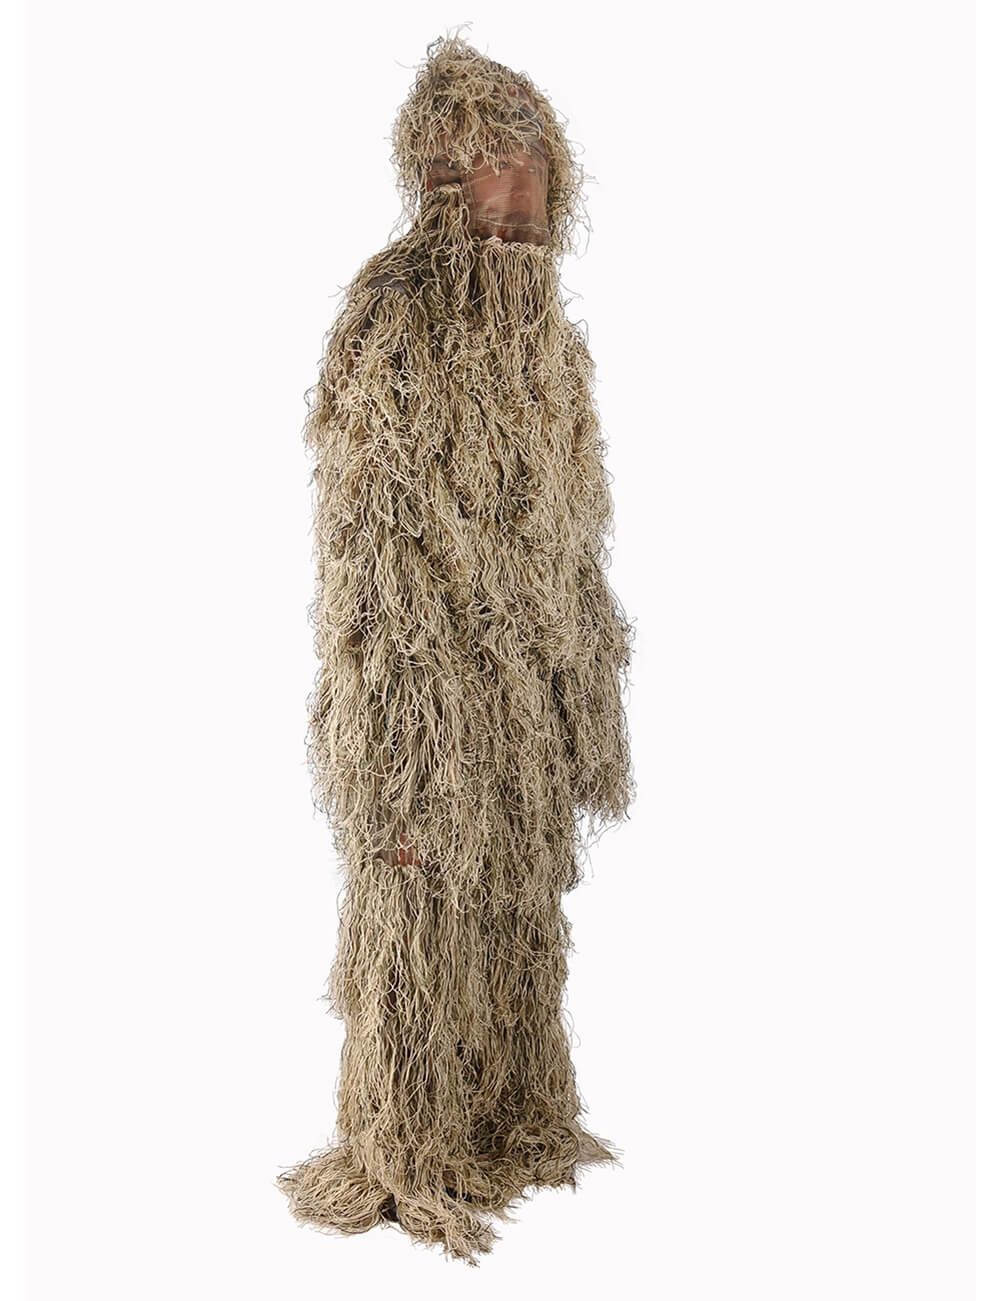 Ghost Ghillie Suit for Men | Dense, Double-Stitched Design | Superior Camo Hunting Clothes for Hunters